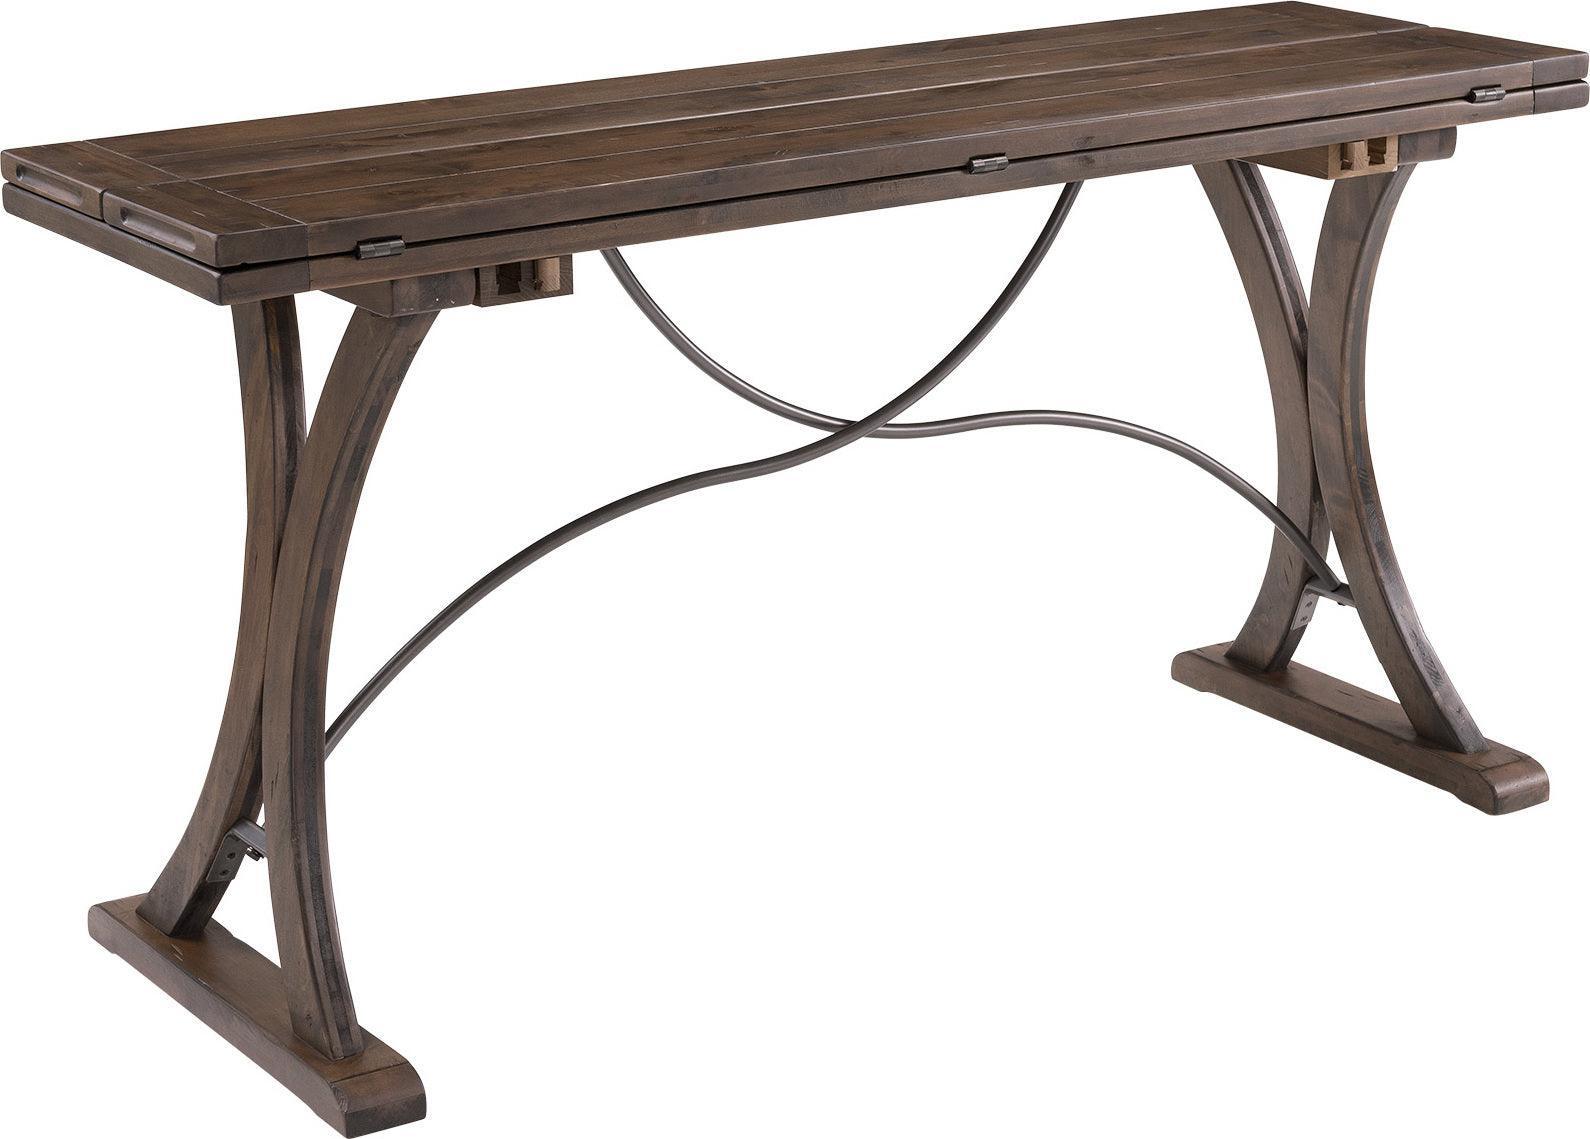 Elements Dining Tables - Camden Folding Top Dining Table